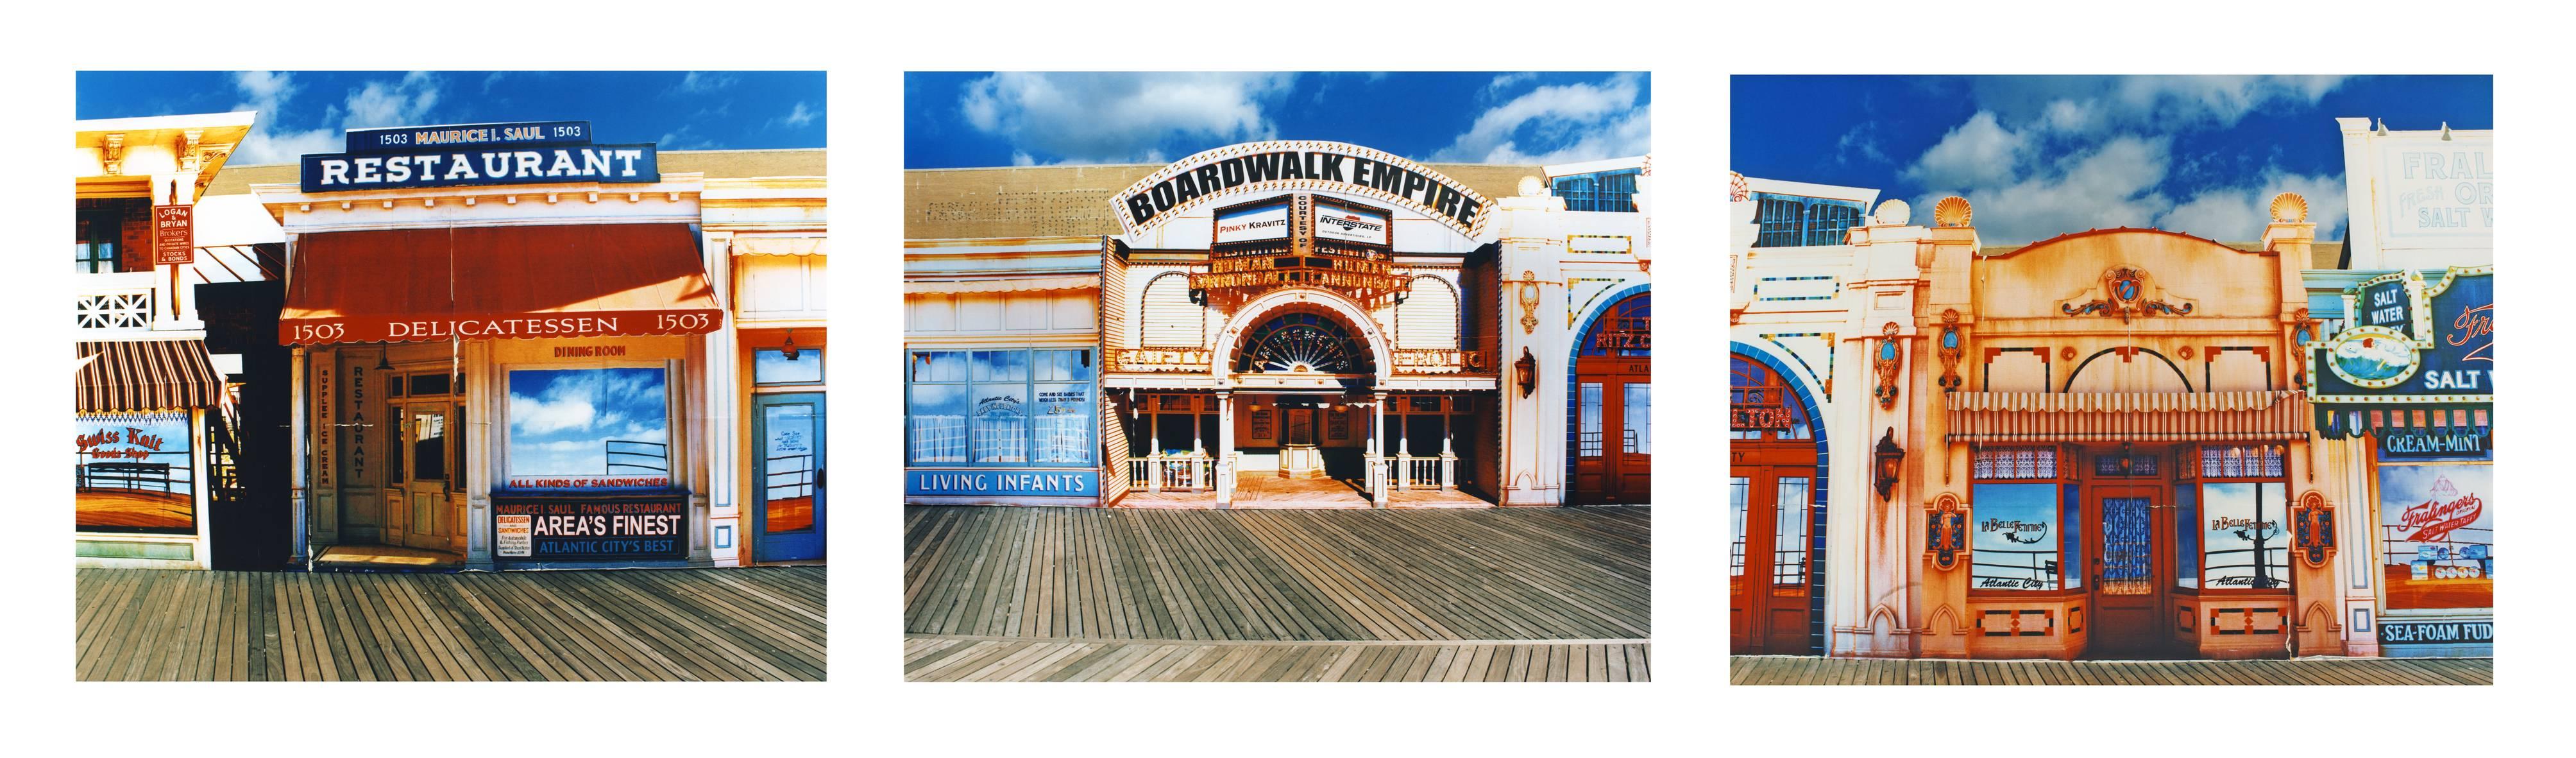 Part of Richard Heeps 2013 'Wildwood Days' series, this was shot in Atlantic City. This is typical of the style Richard Heeps where by he uses the effect of making you question what is real and what is just a facade... 

This artwork is a limited